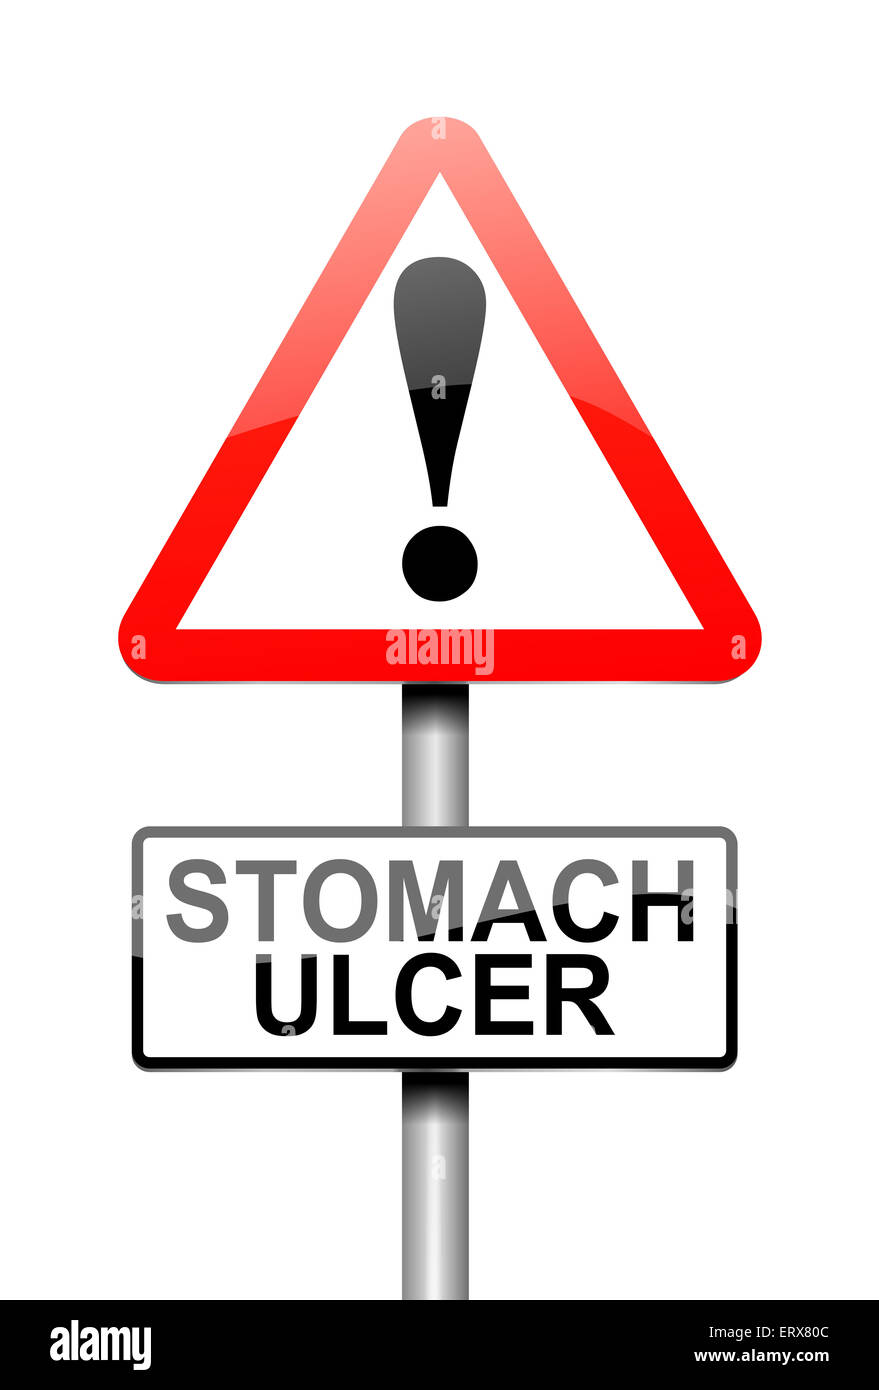 Stomach ulcer concept. Stock Photo